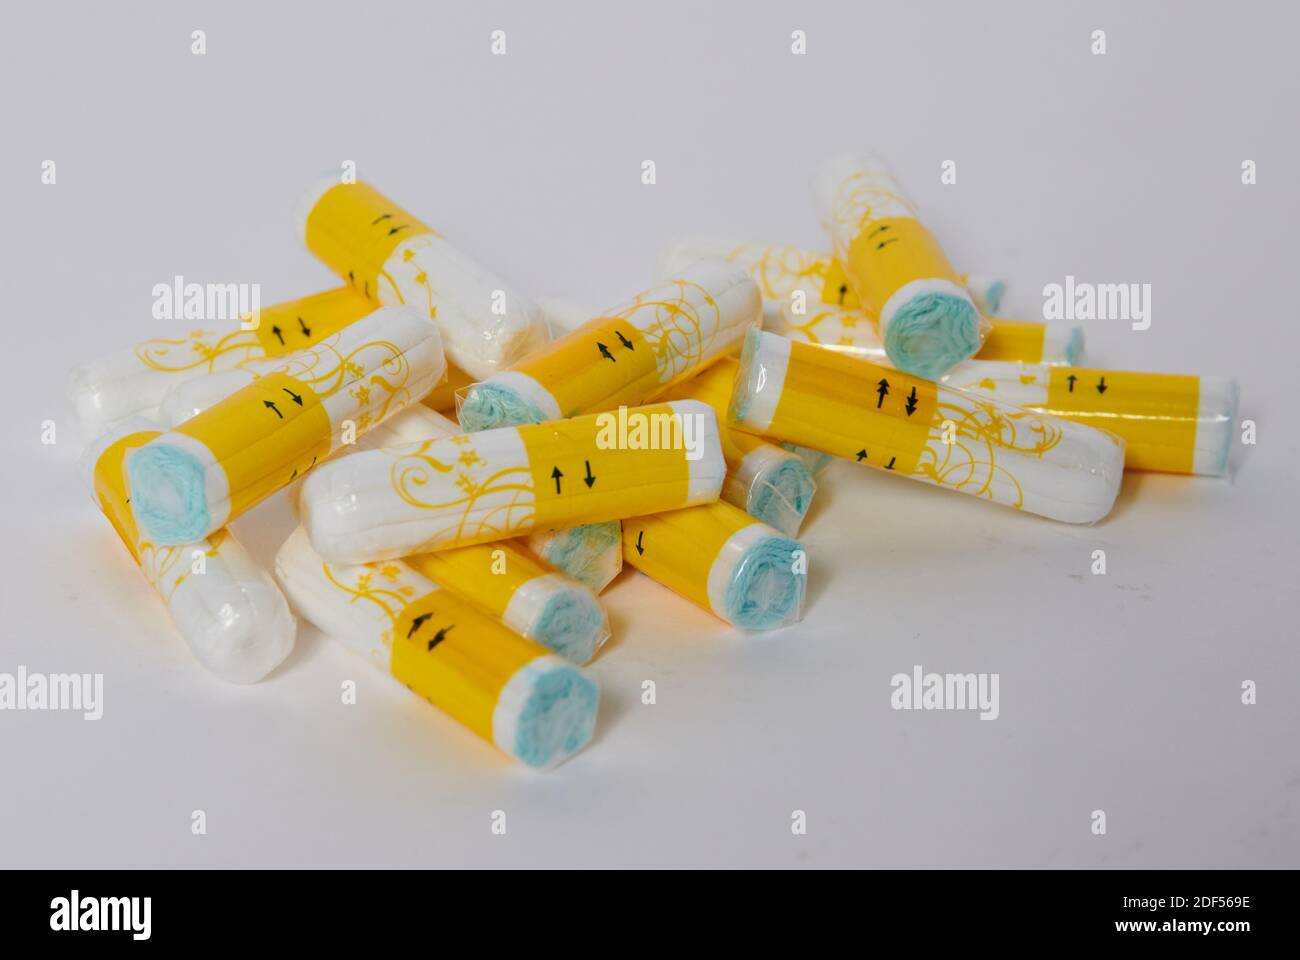 Berlin, Germany. 27th Nov, 2020. Tampons of Rossmann's own brand "facelle"  made of organic cotton are lying on a table. Credit: Annette  Riedl/dpa/Alamy Live News Stock Photo - Alamy